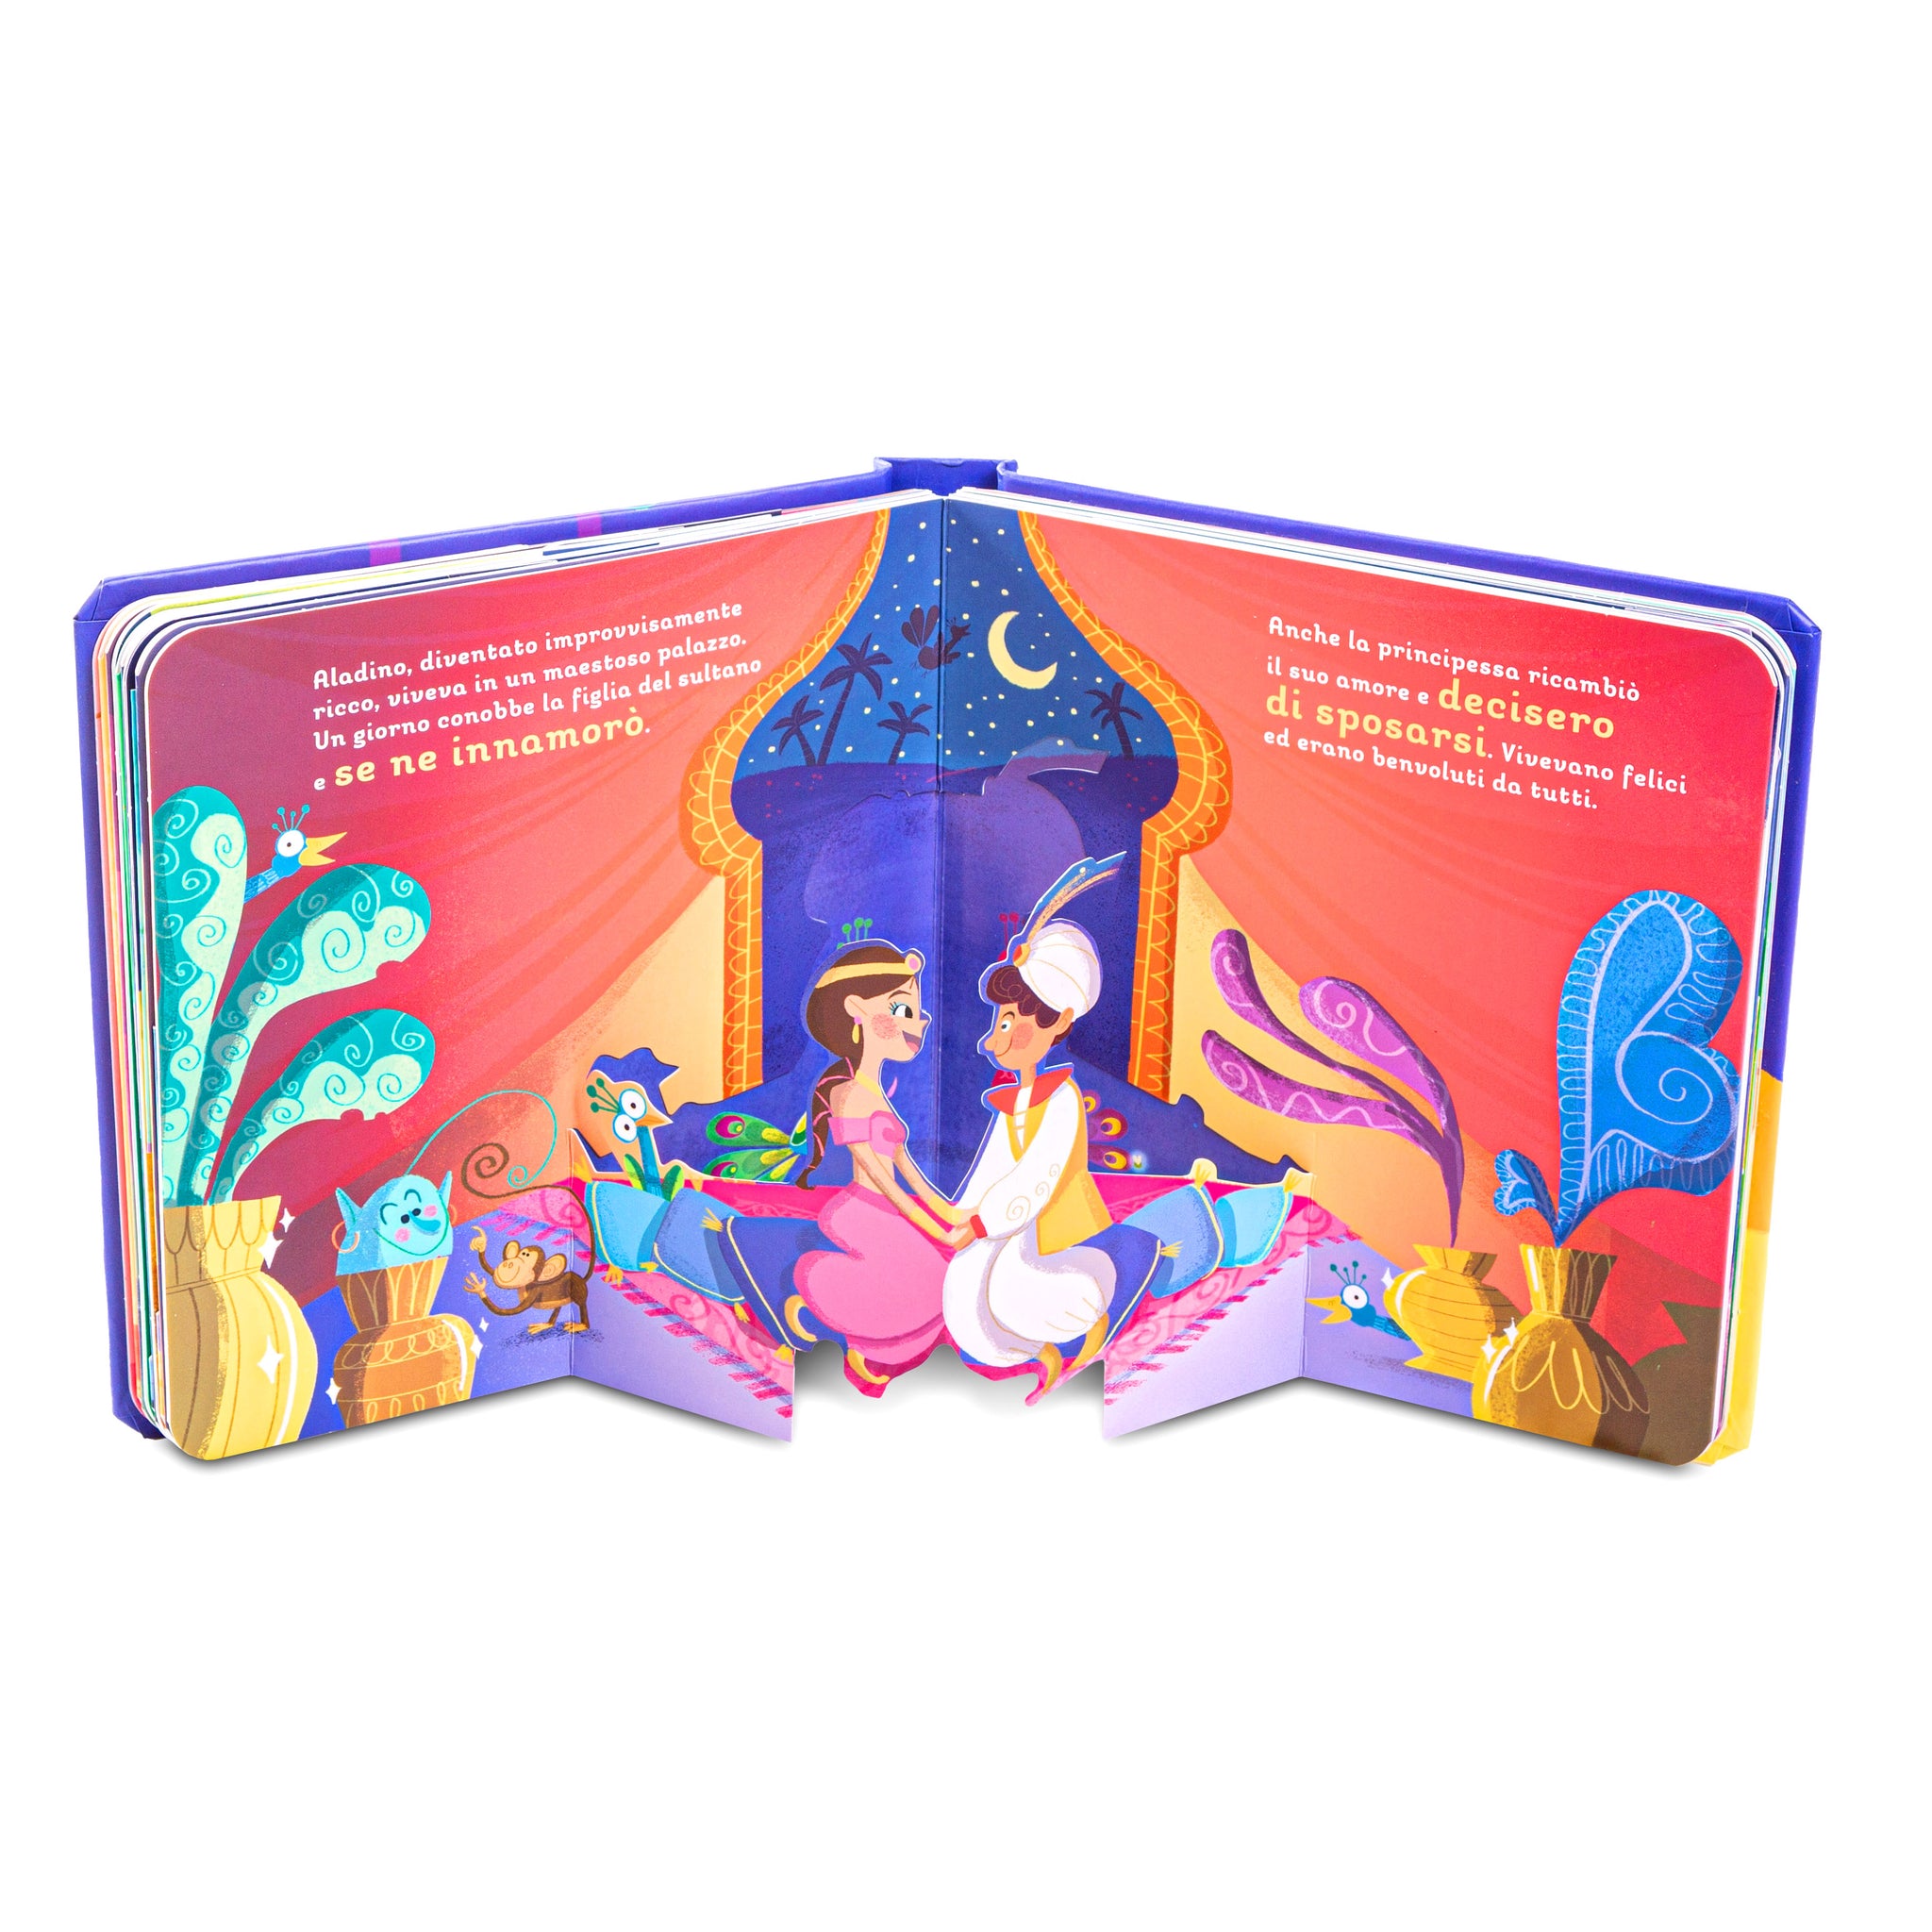 Pop up fairy tales - Aladdin and the wonderful lamp